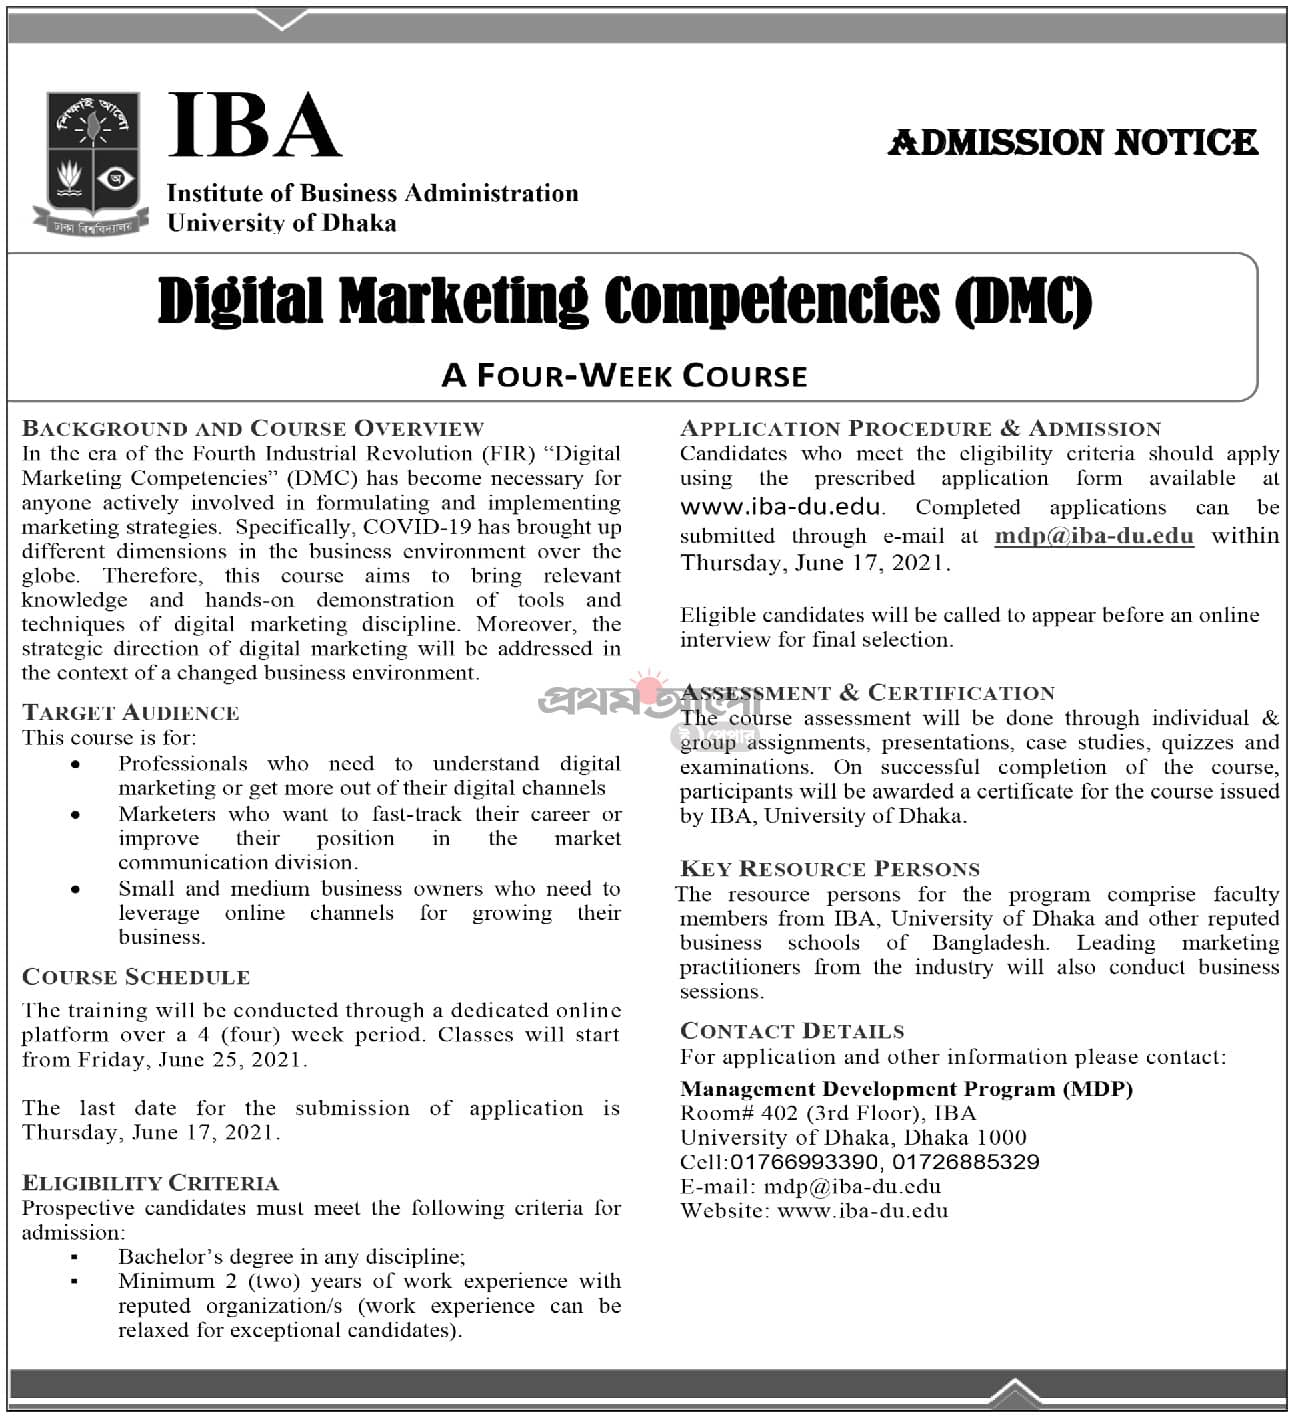 Digital Marketing Course from IBA-DU courses